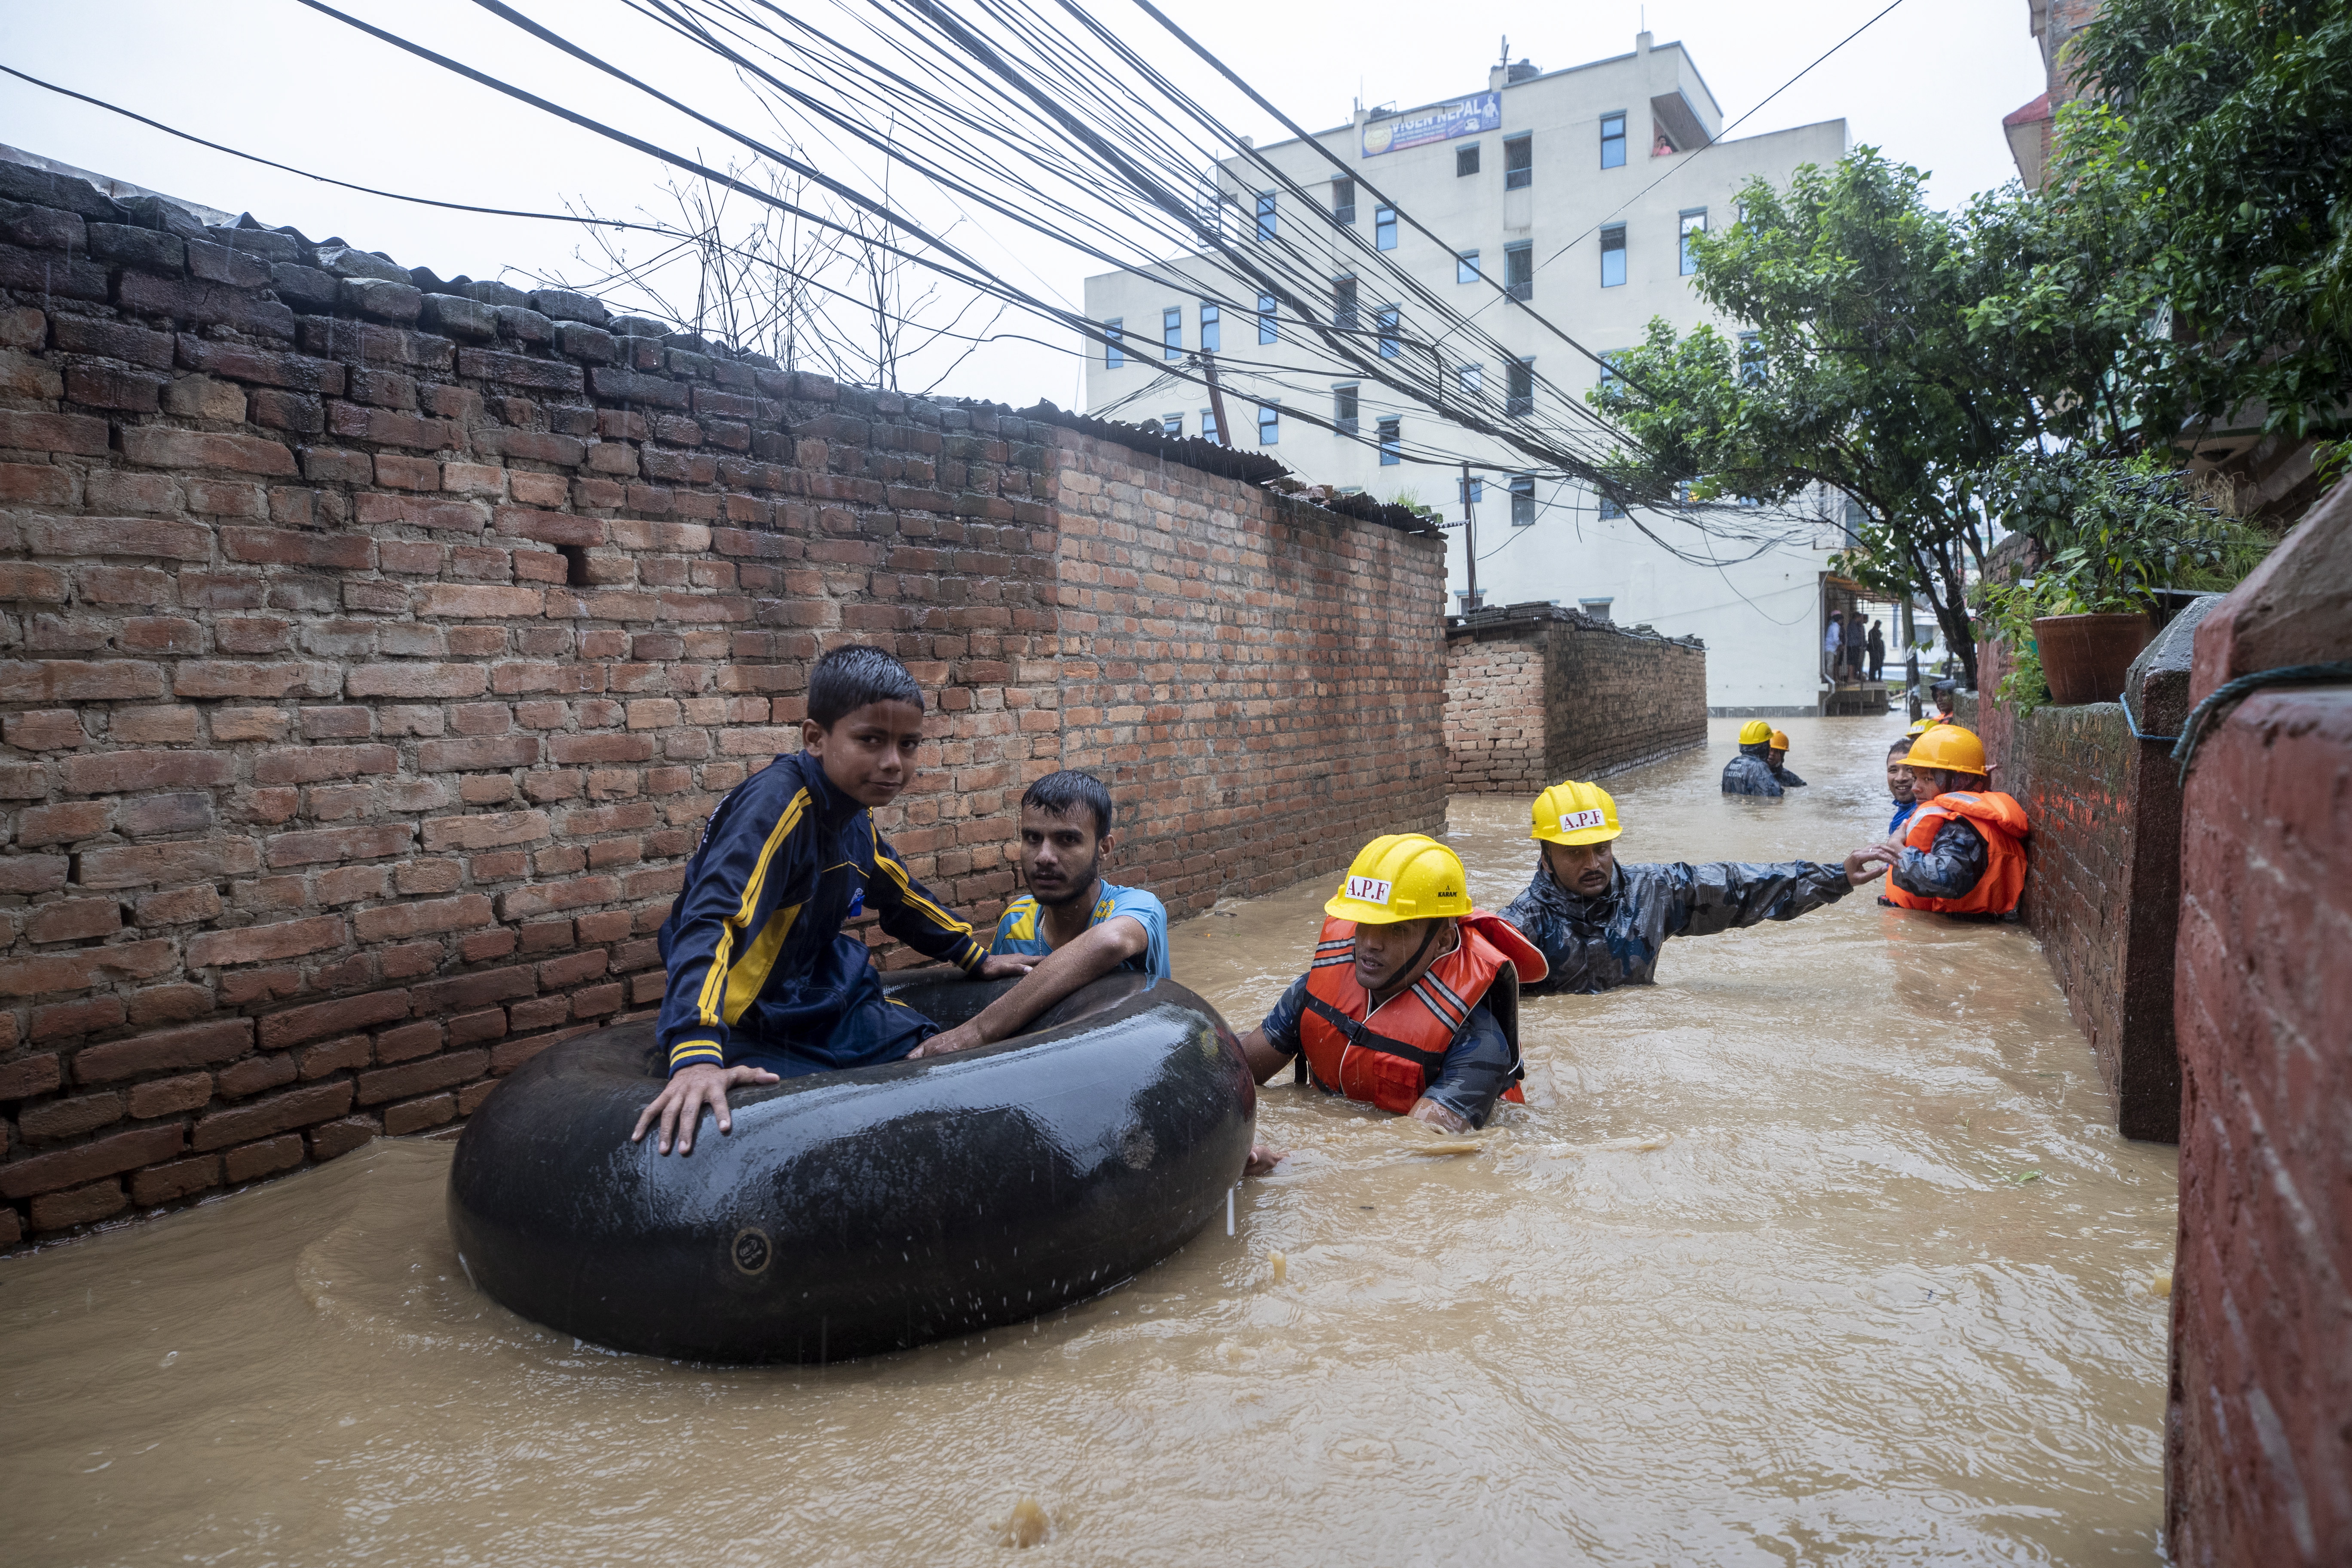 epa07712284 Members of armed police force rescue people from flooded houses following torrential rains in Kathmandu, Nepal, 12 July 2019. Meteorologists warned of heavy monsoon rains in Nepal that put several parts of the country at risk of floods and landslides.  EPA/NARENDRA SHRESTHA